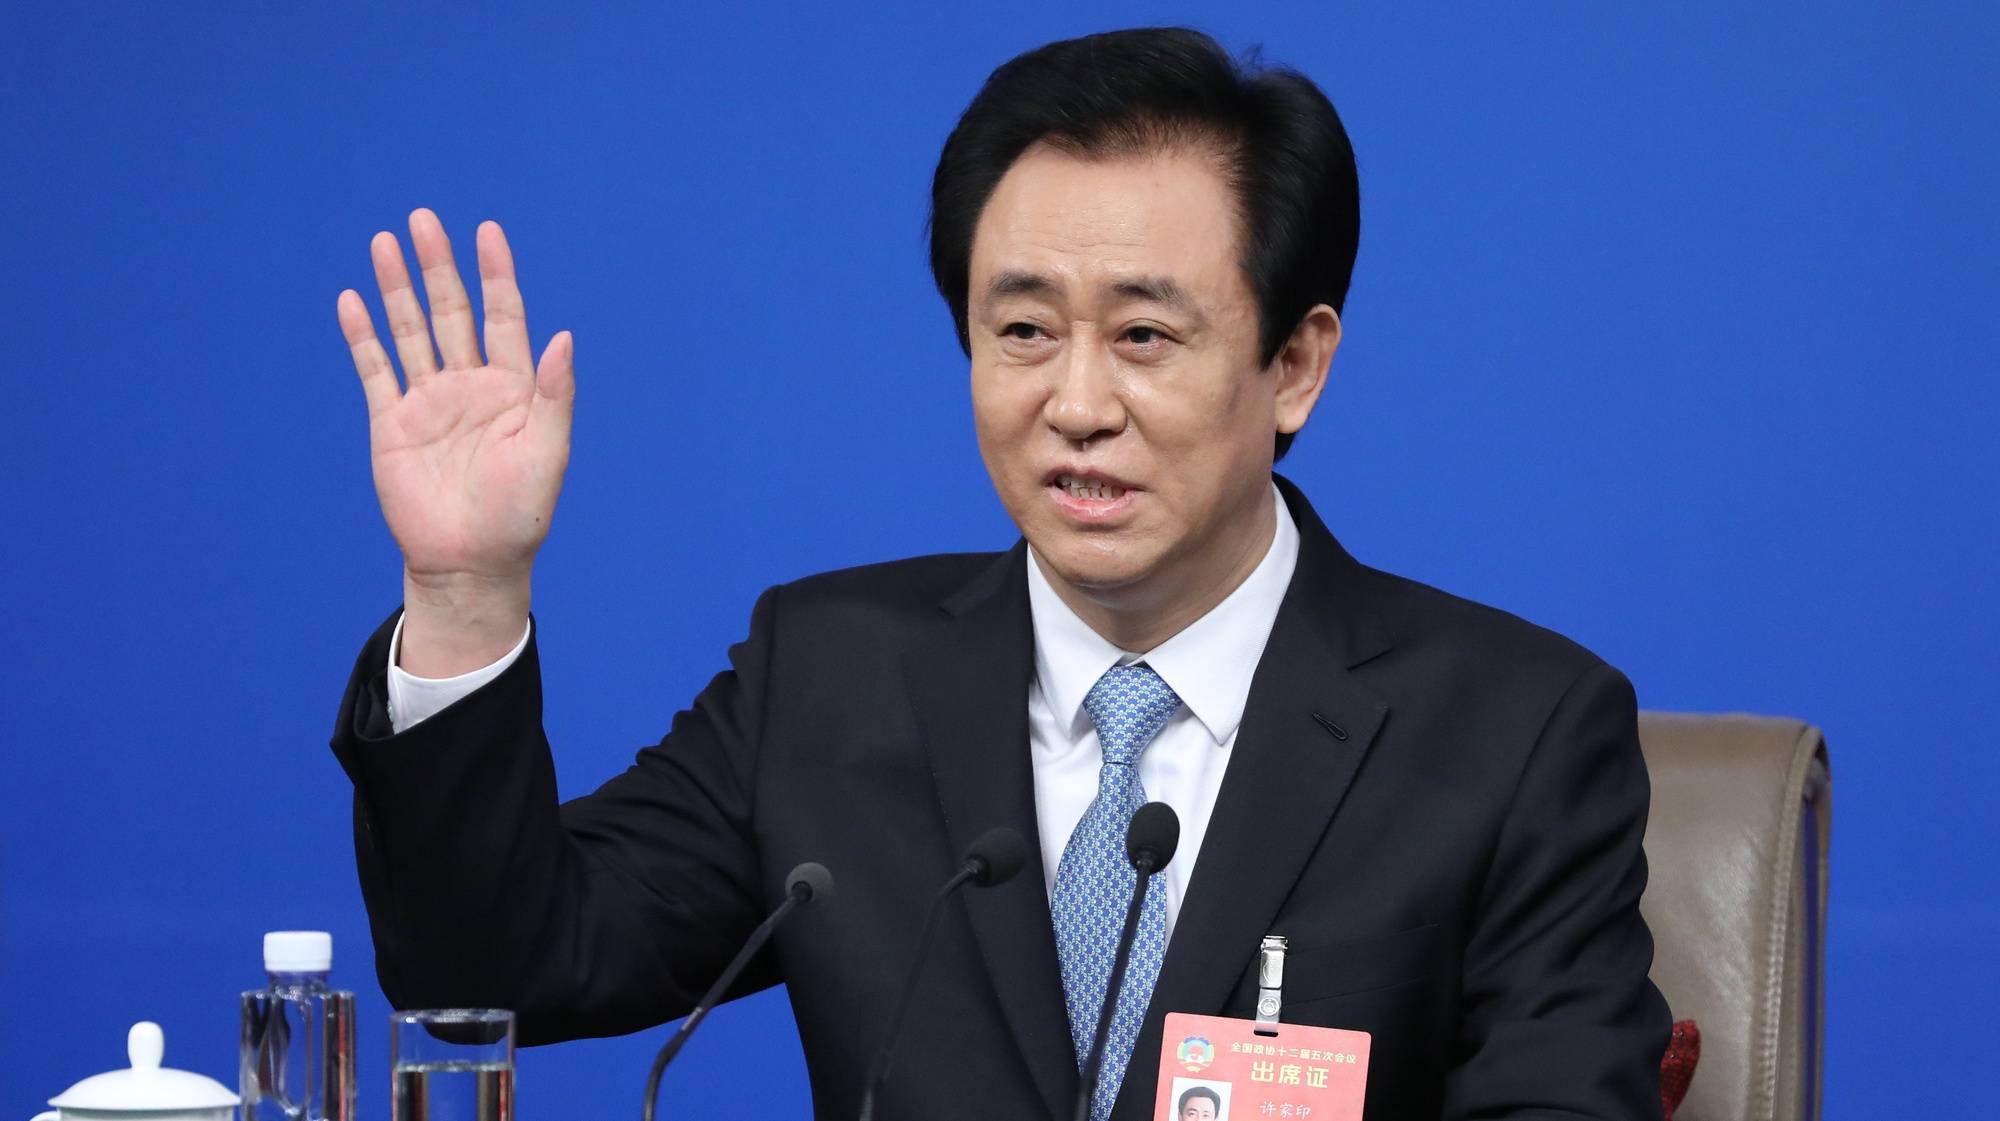 epa05837810 Xu Jiayin, Standing Committee Member of the 12th CPPCC National Committee; Board Chairman of Evergrande Group, waves hands during a press conference on the sidelines of the fifth session of the 12th Chinese People&#039;s Political Consultative Conference (CPPCC) in Beijing, China, 09 March 2017. The CPPCC is the top advisory body of the Chinese political system and runs alongside the annual plenary meetings of the 12th National People&#039;s Congress (NPC), together known as &#039;Lianghui&#039; or &#039;Two Meetings&#039;.  EPA/WU HONG